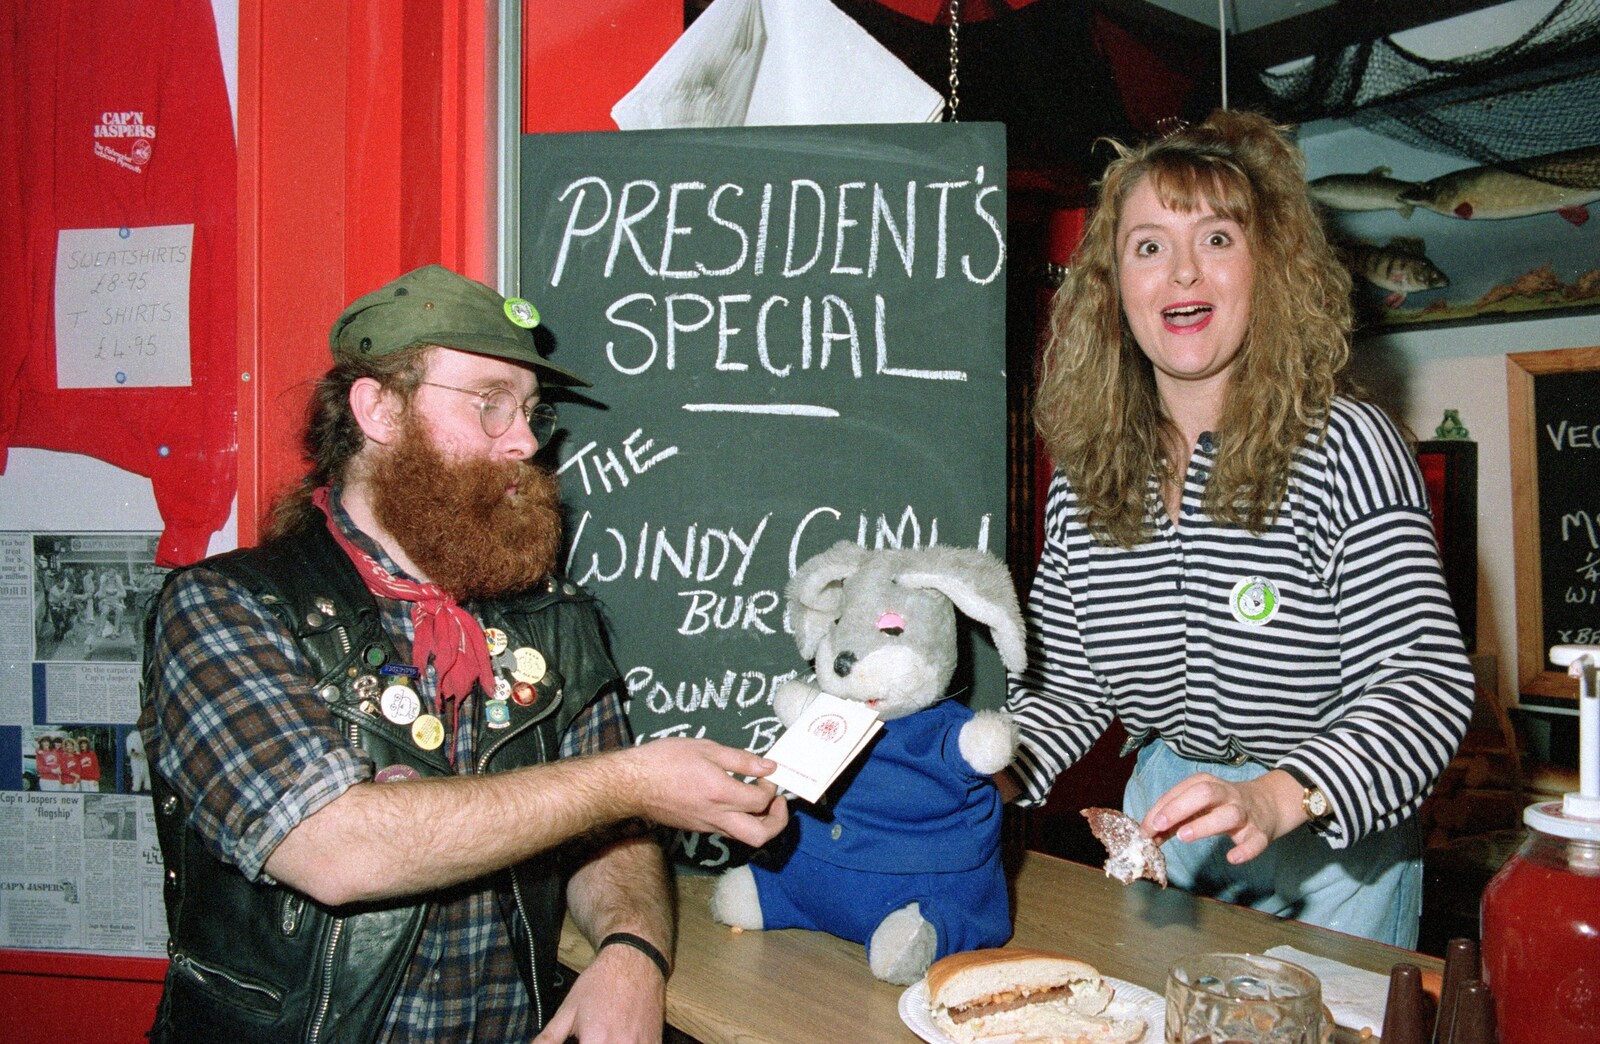 Gimli, the SU President and Gus Honeybun from Uni: Gus Honeybun and the Windy Gimli Burger, Plymouth - 17th October 1988